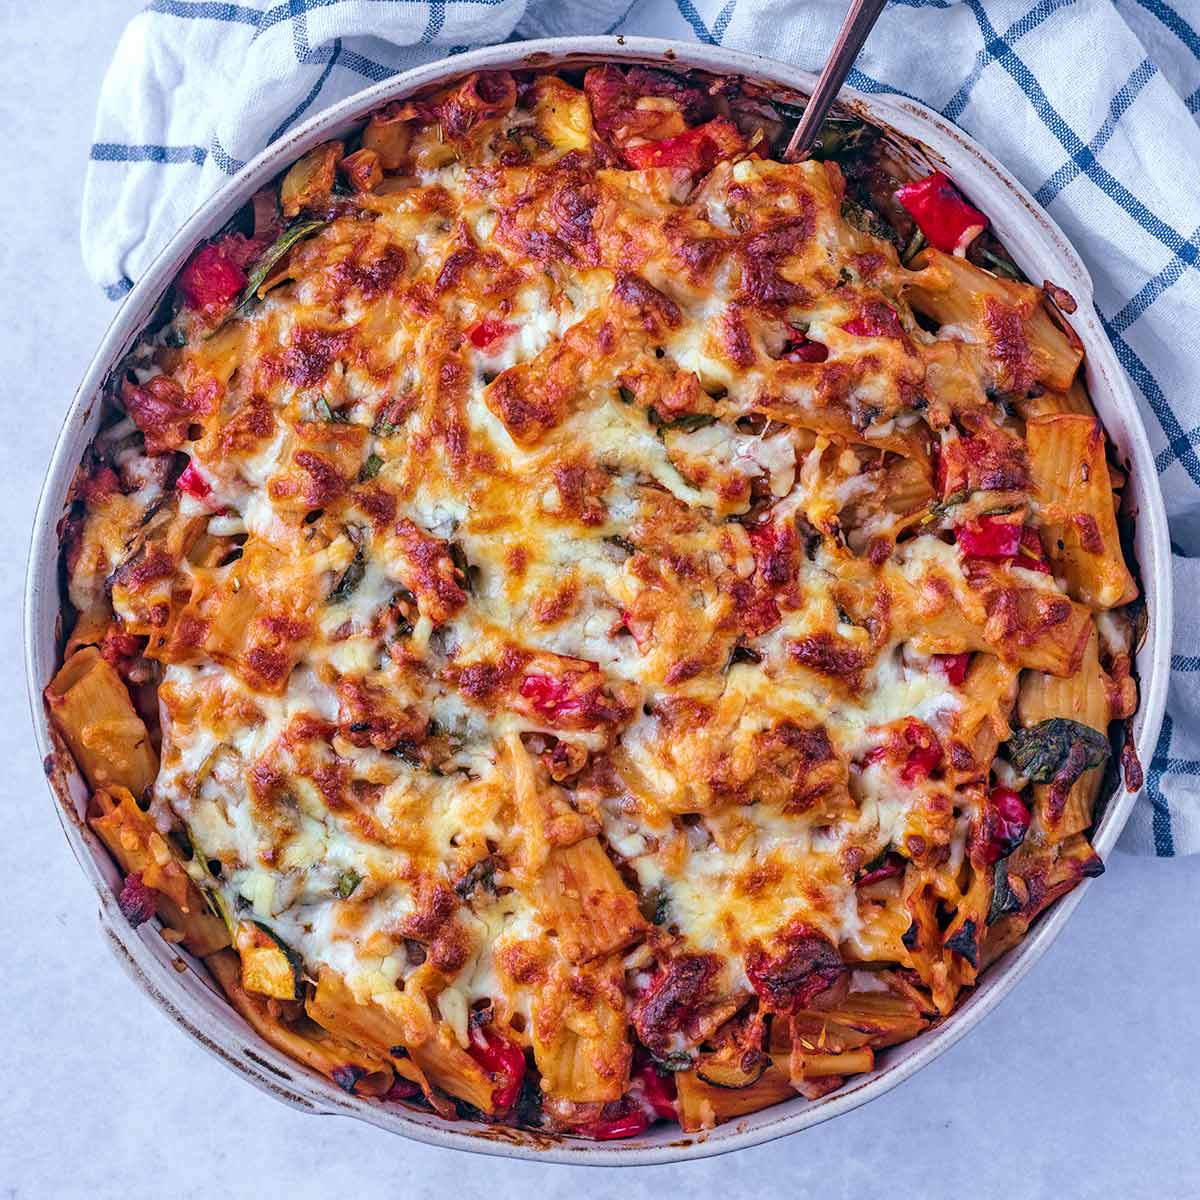 Cooked pasta bake in a large baking dish.